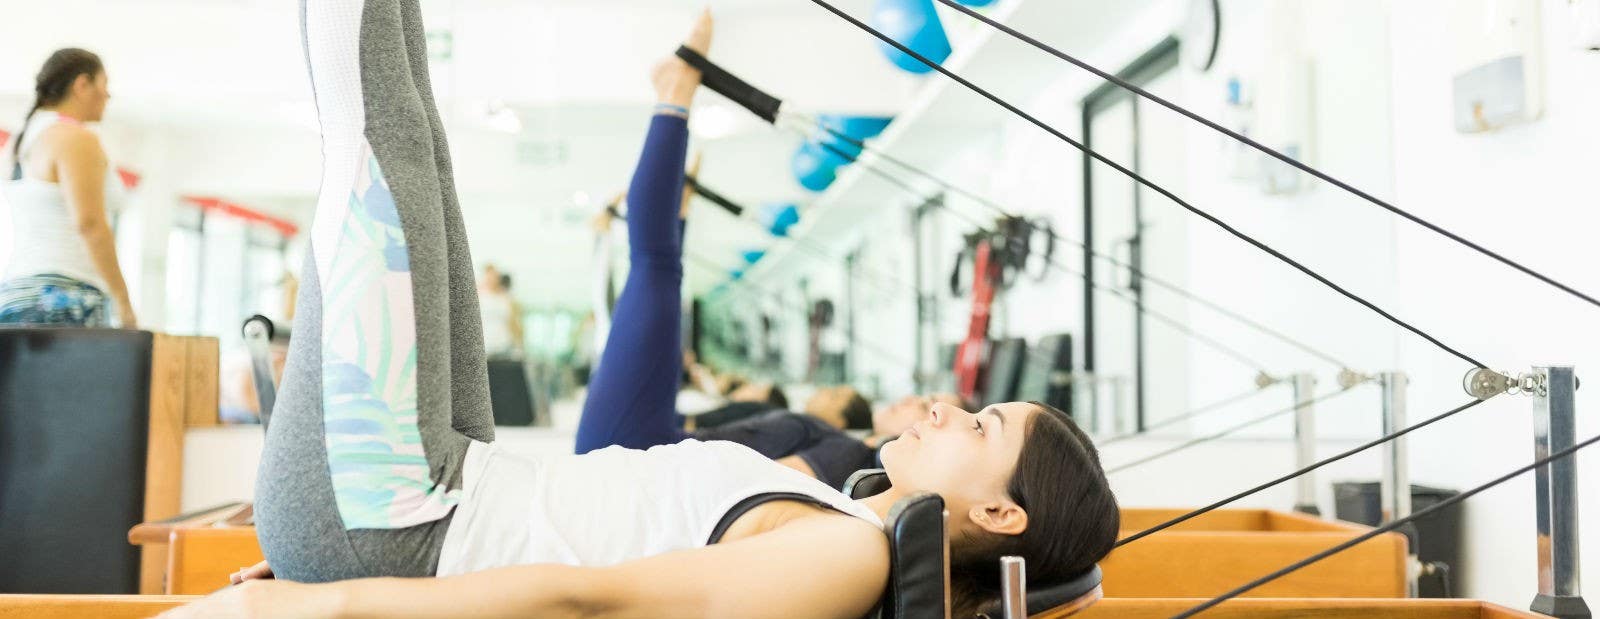 What to Expect at Your First Reformer Pilates Class - Dynamic